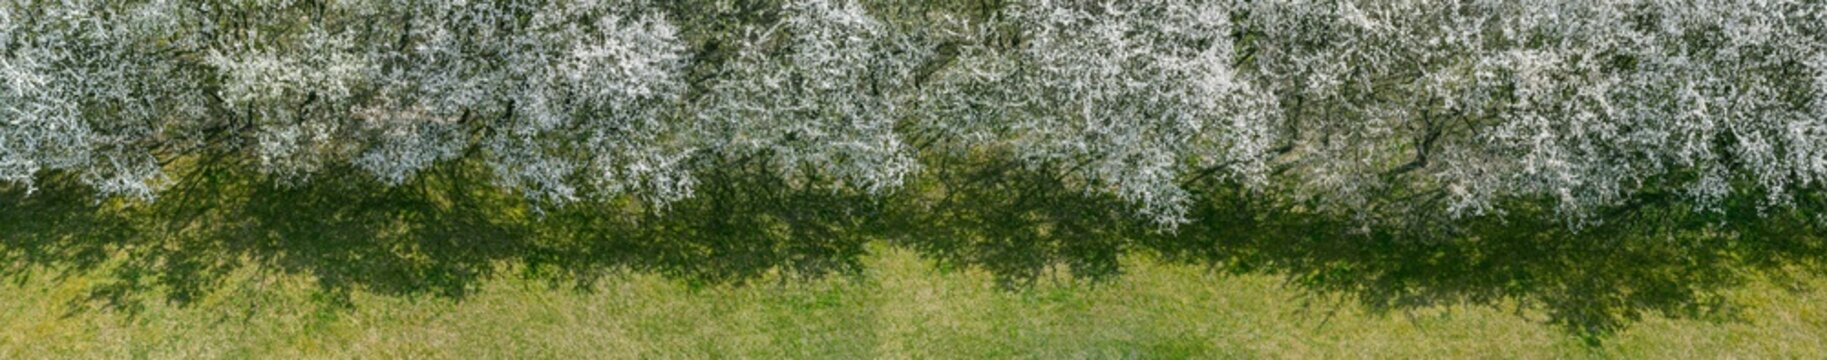 Aerial Panoramic View. Natural Background Of Blooming Cherry Trees With White Flowers Seen From Above